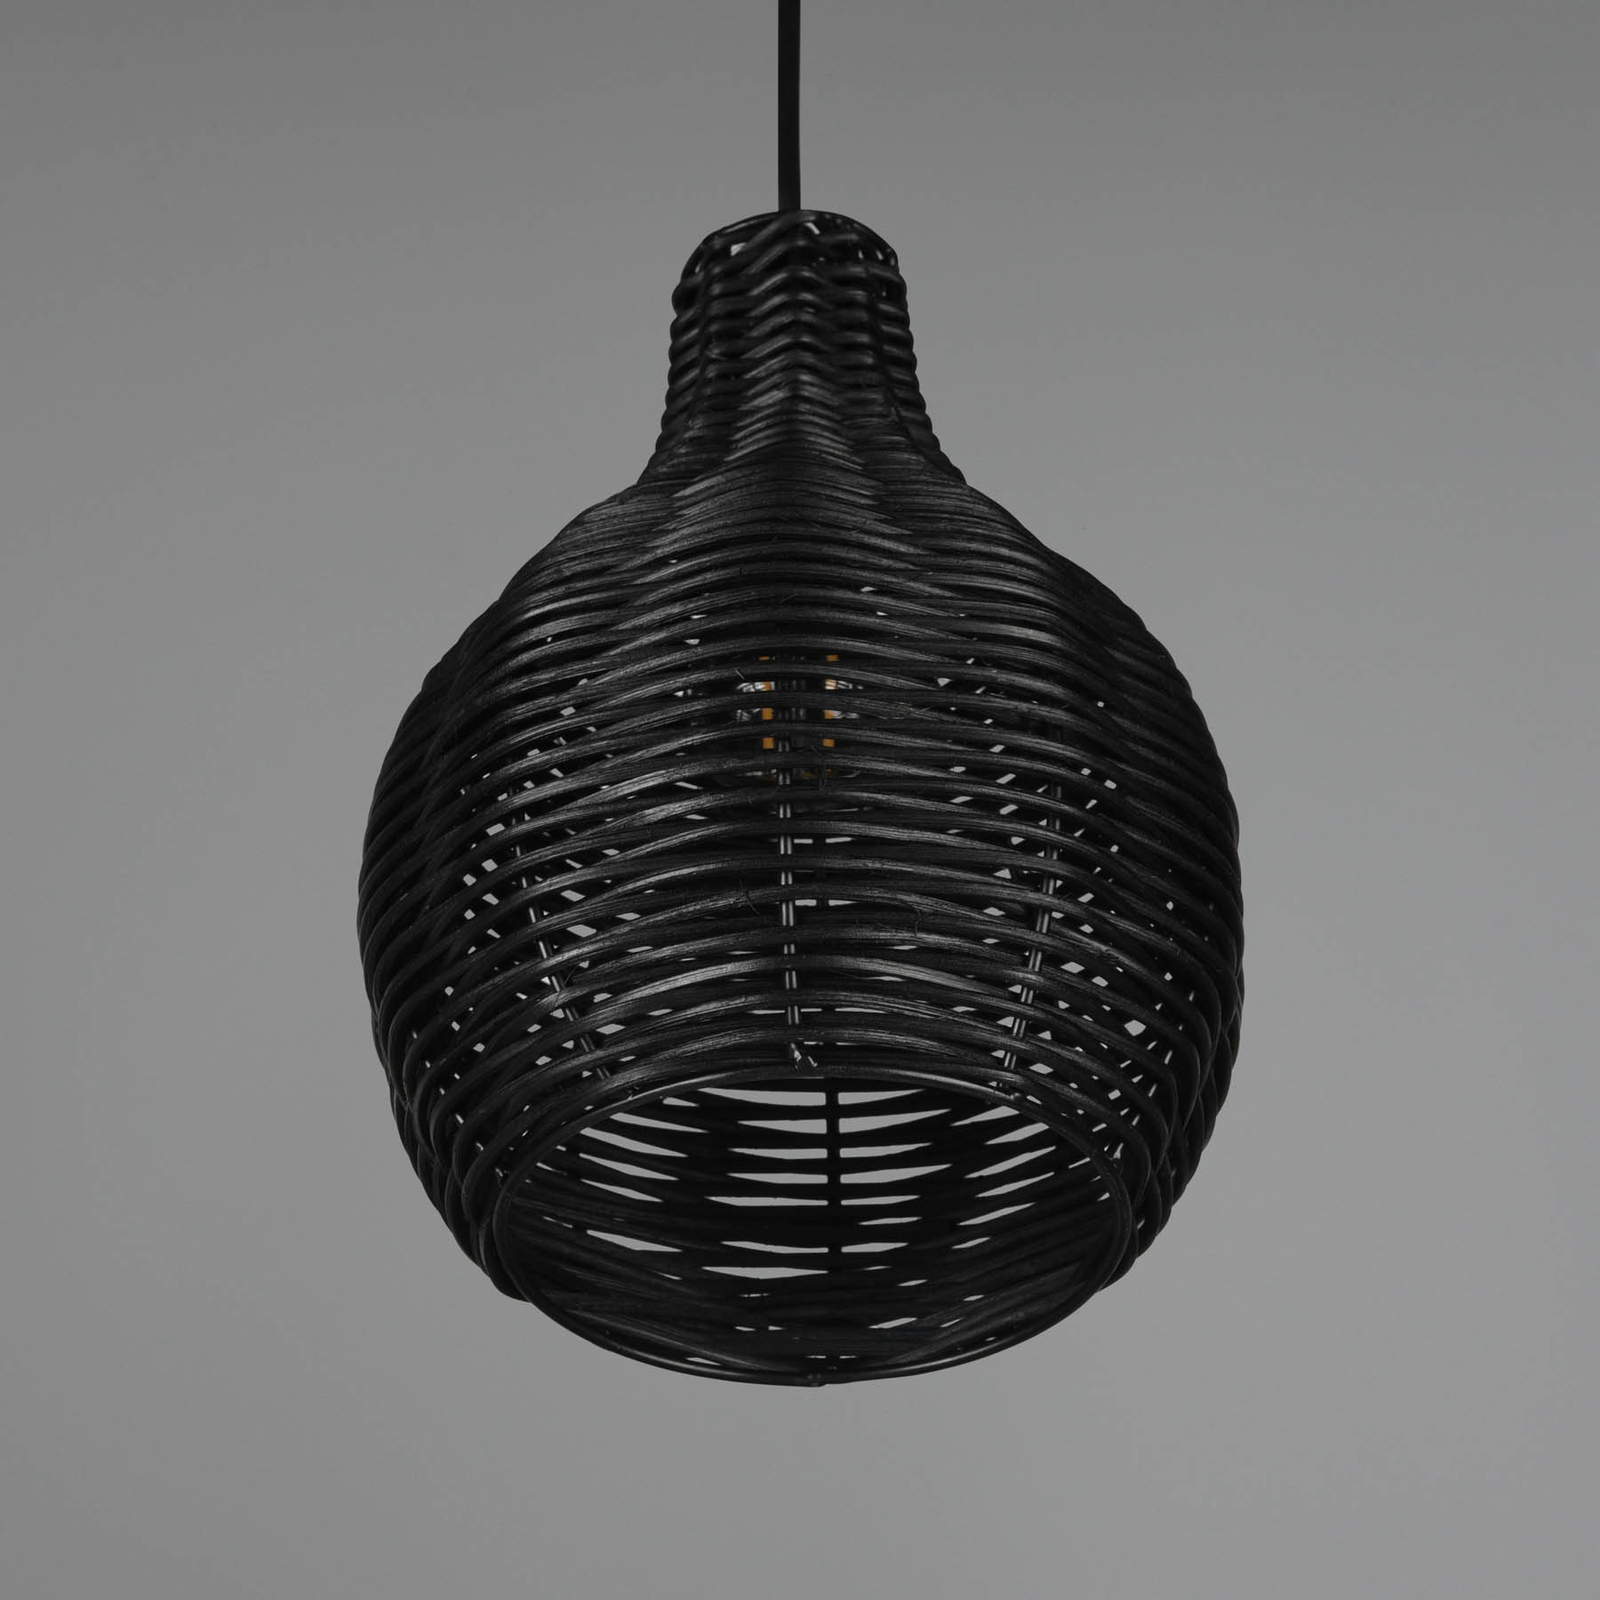 Sprout pendant light made of rattan, 1-bulb, black